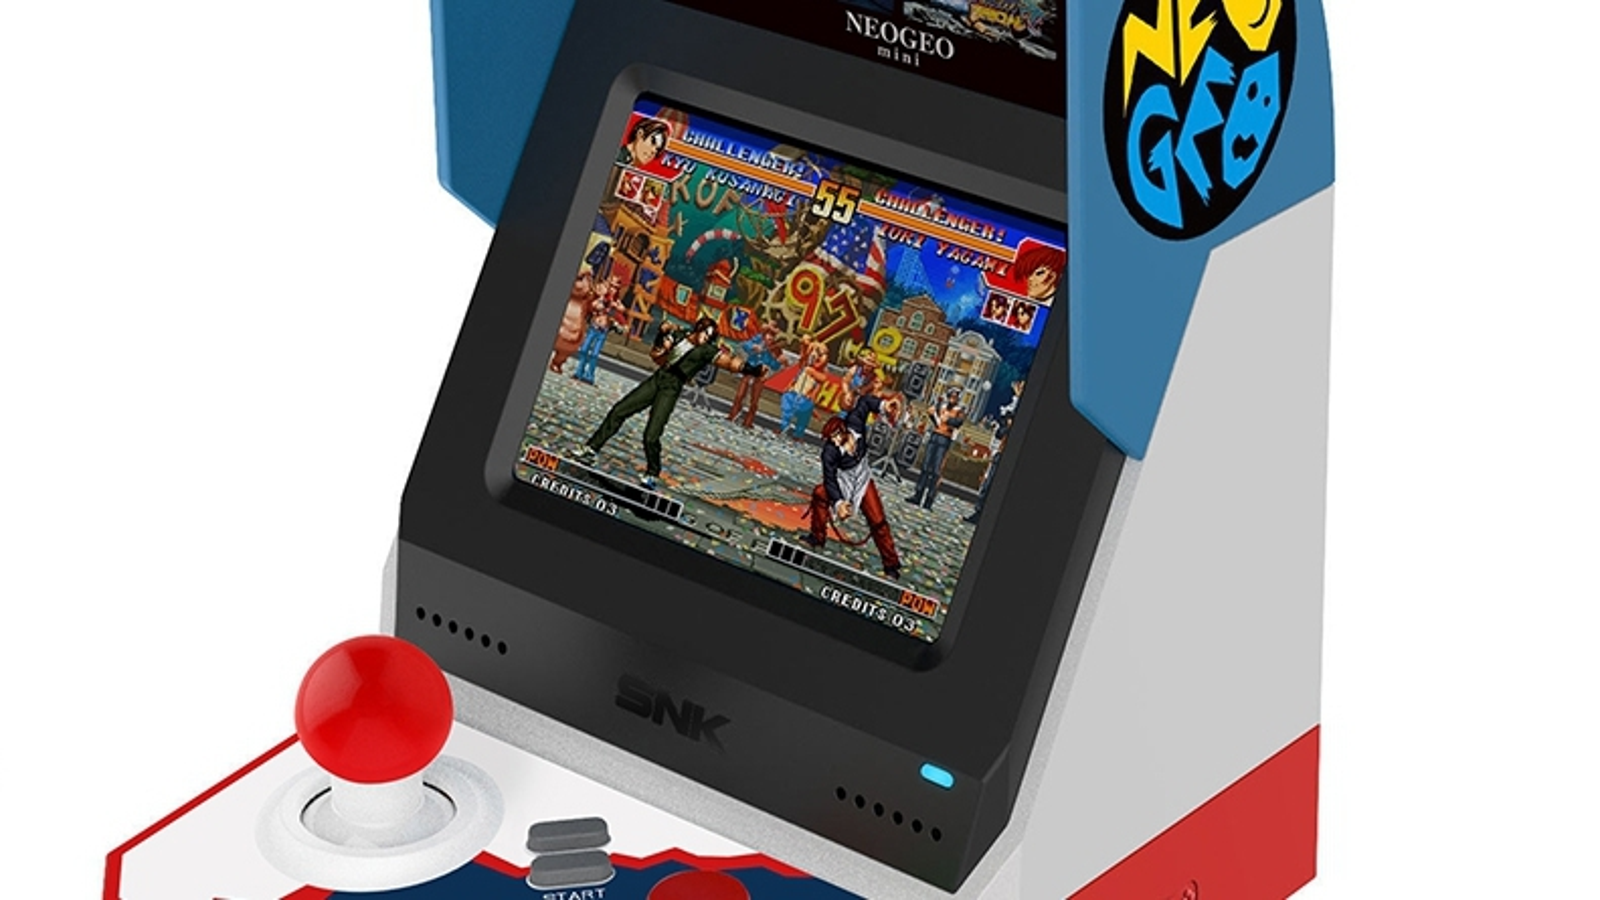 SNK Neo Geo Mini Console with 40 games - International Version